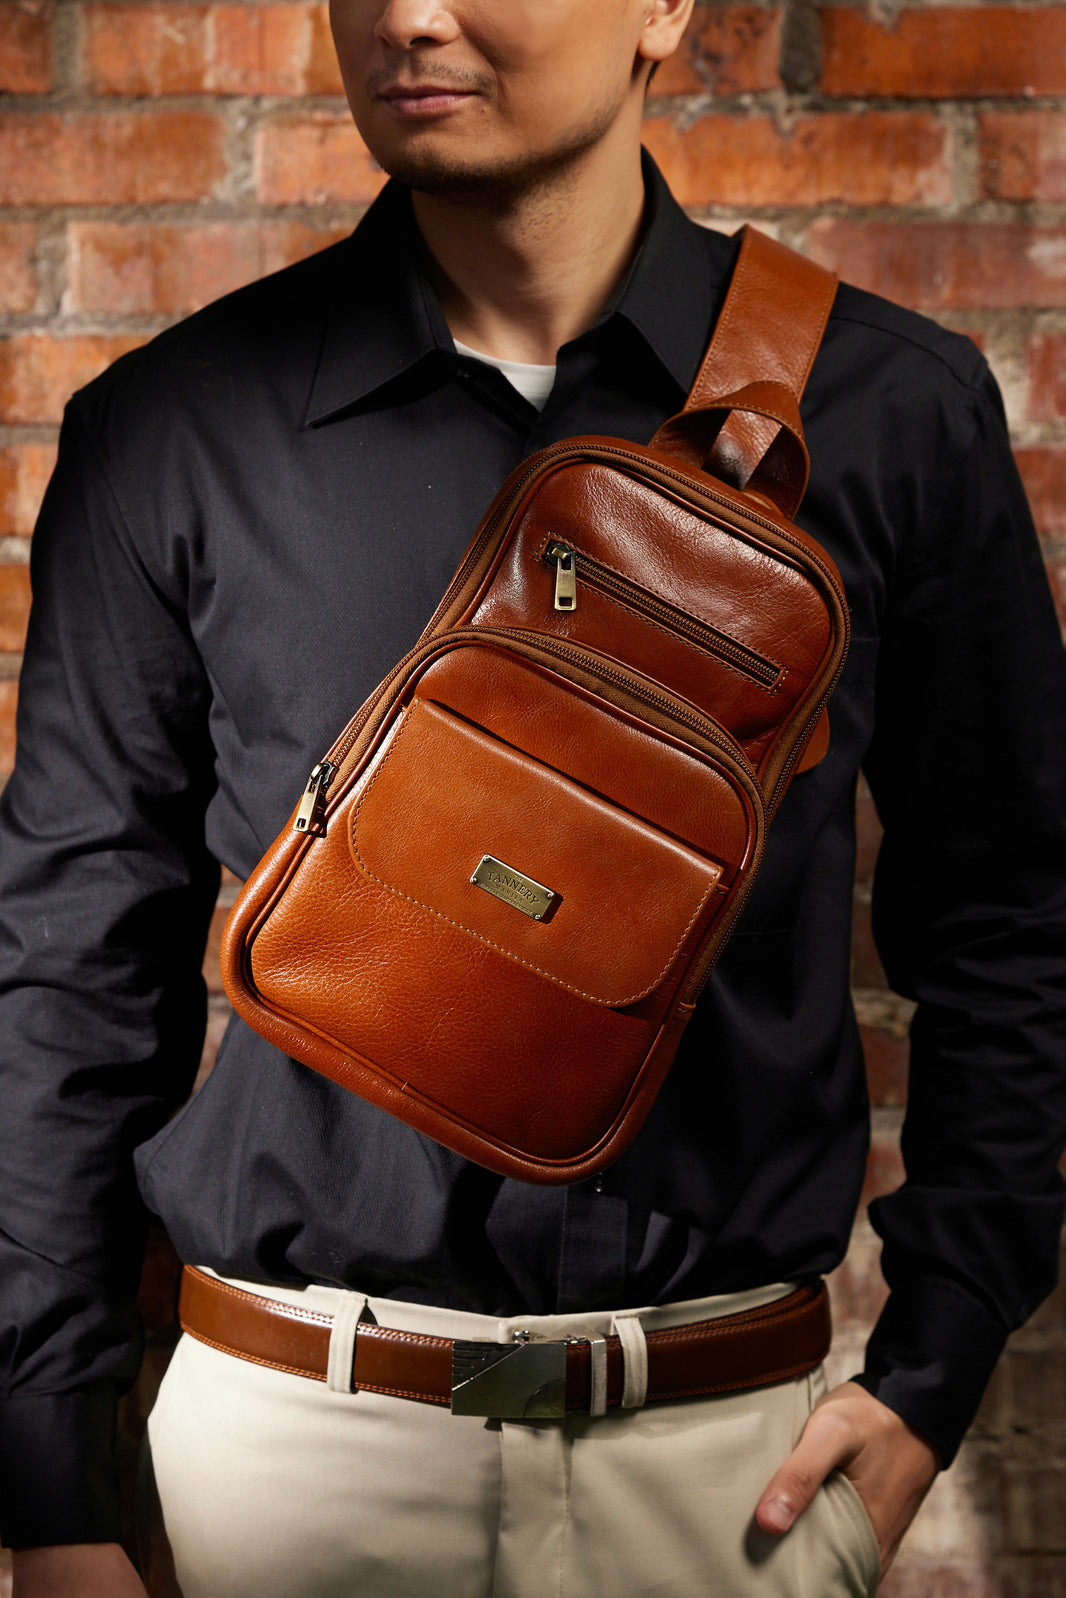 The Tannery Manila: Premium line of leather bags and accessories